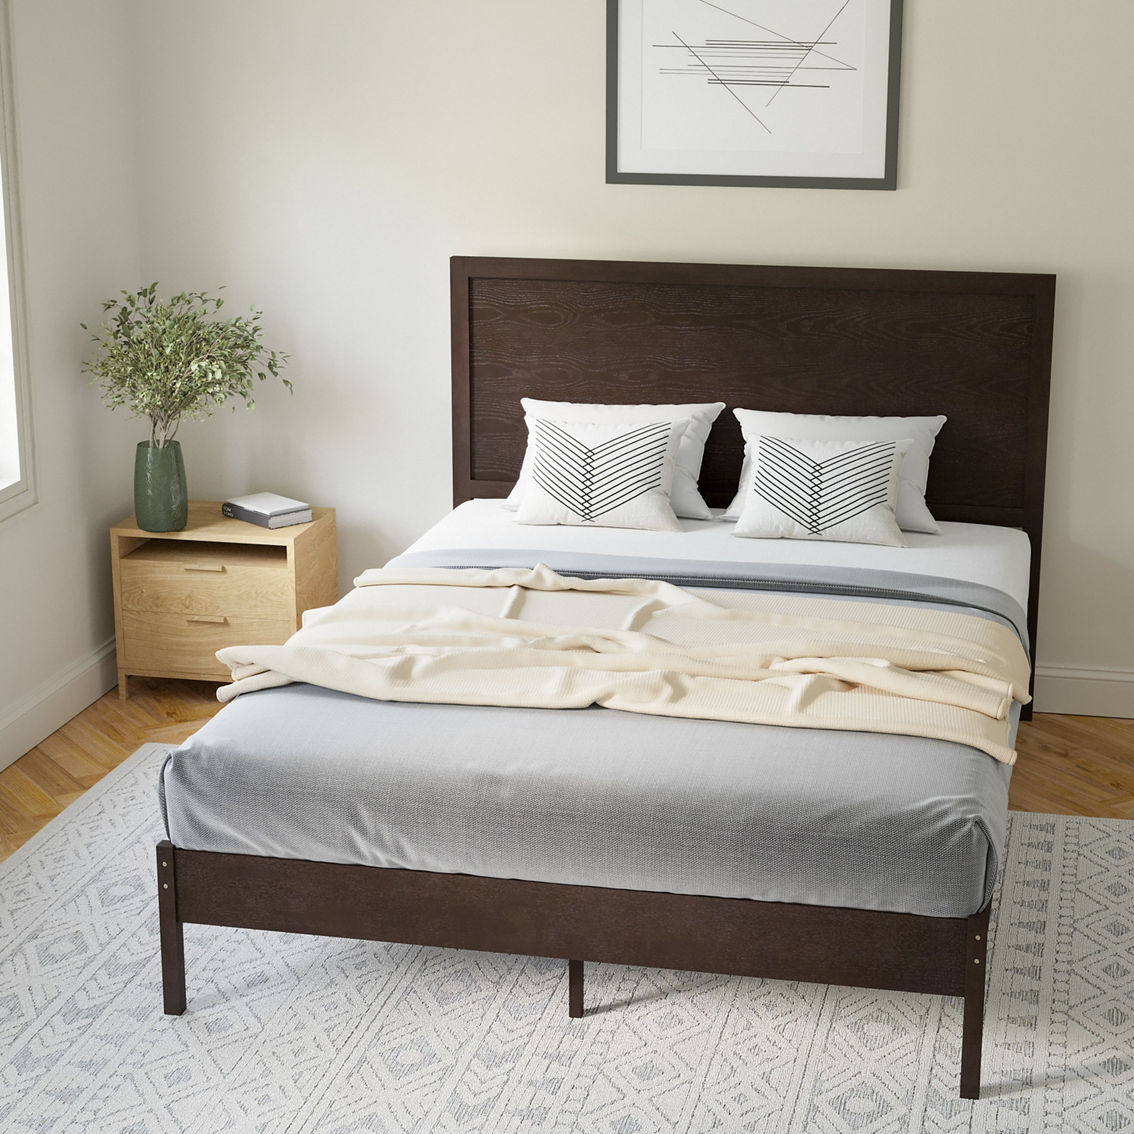 Flash Furniture Wooden Platform Bed with Headboard - Image 3 of 5